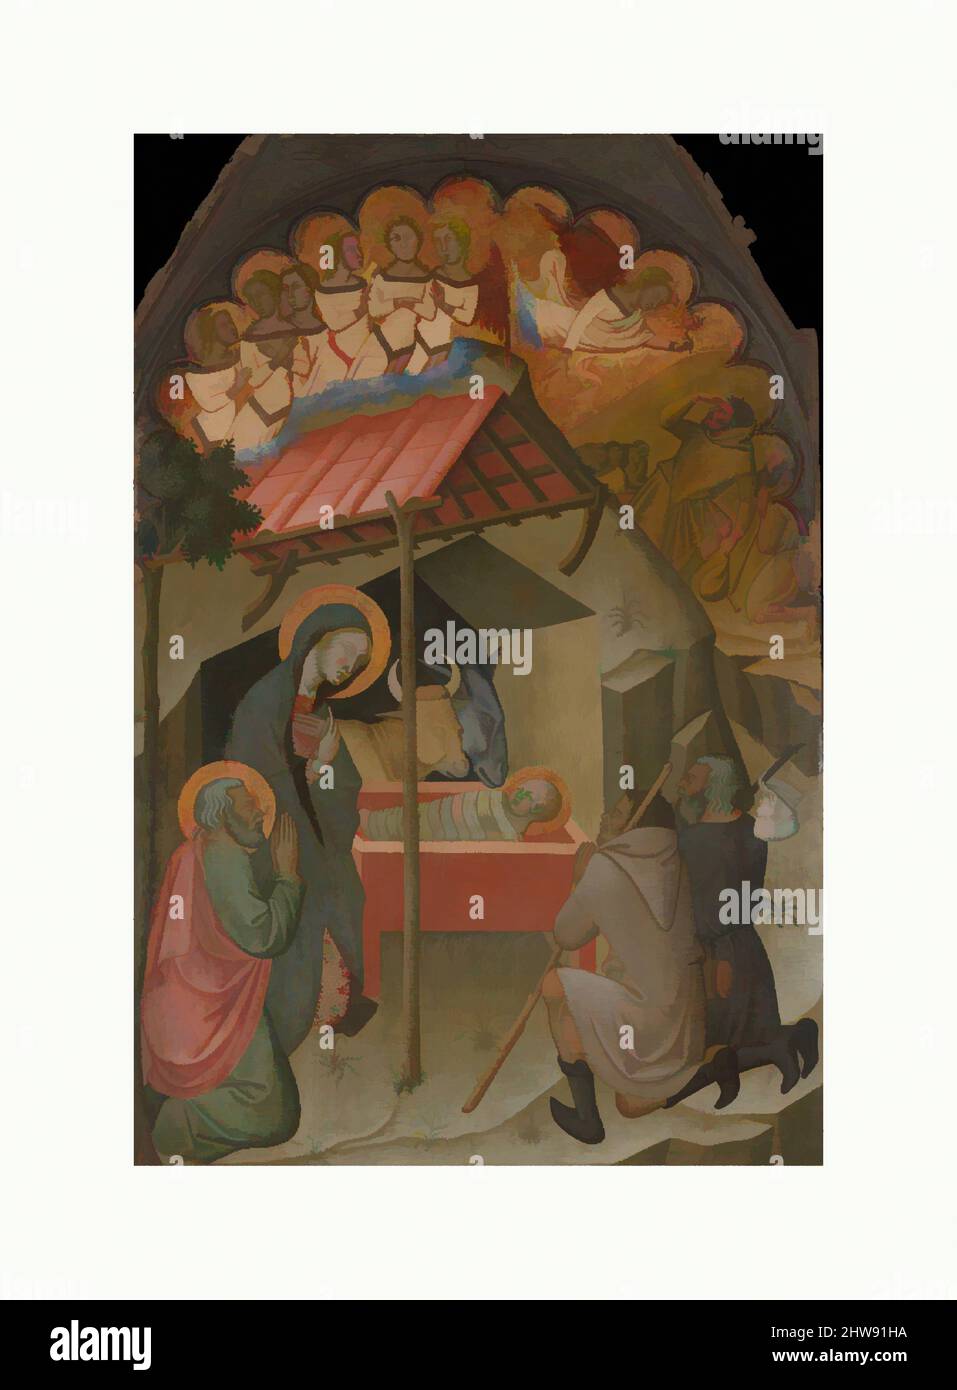 Art inspired by The Adoration of the Shepherds, 1374, Made in Siena, Italy, Italian, Tempera on poplar, gilding, Overall: 69 1/8 x 45 1/8 in. (175.6 x 114.6 cm), Paintings-Panels, Bartolo di Fredi (Italian, active by 1353–died 1410 Siena), Once the central panel of an altarpiece, this, Classic works modernized by Artotop with a splash of modernity. Shapes, color and value, eye-catching visual impact on art. Emotions through freedom of artworks in a contemporary way. A timeless message pursuing a wildly creative new direction. Artists turning to the digital medium and creating the Artotop NFT Stock Photo